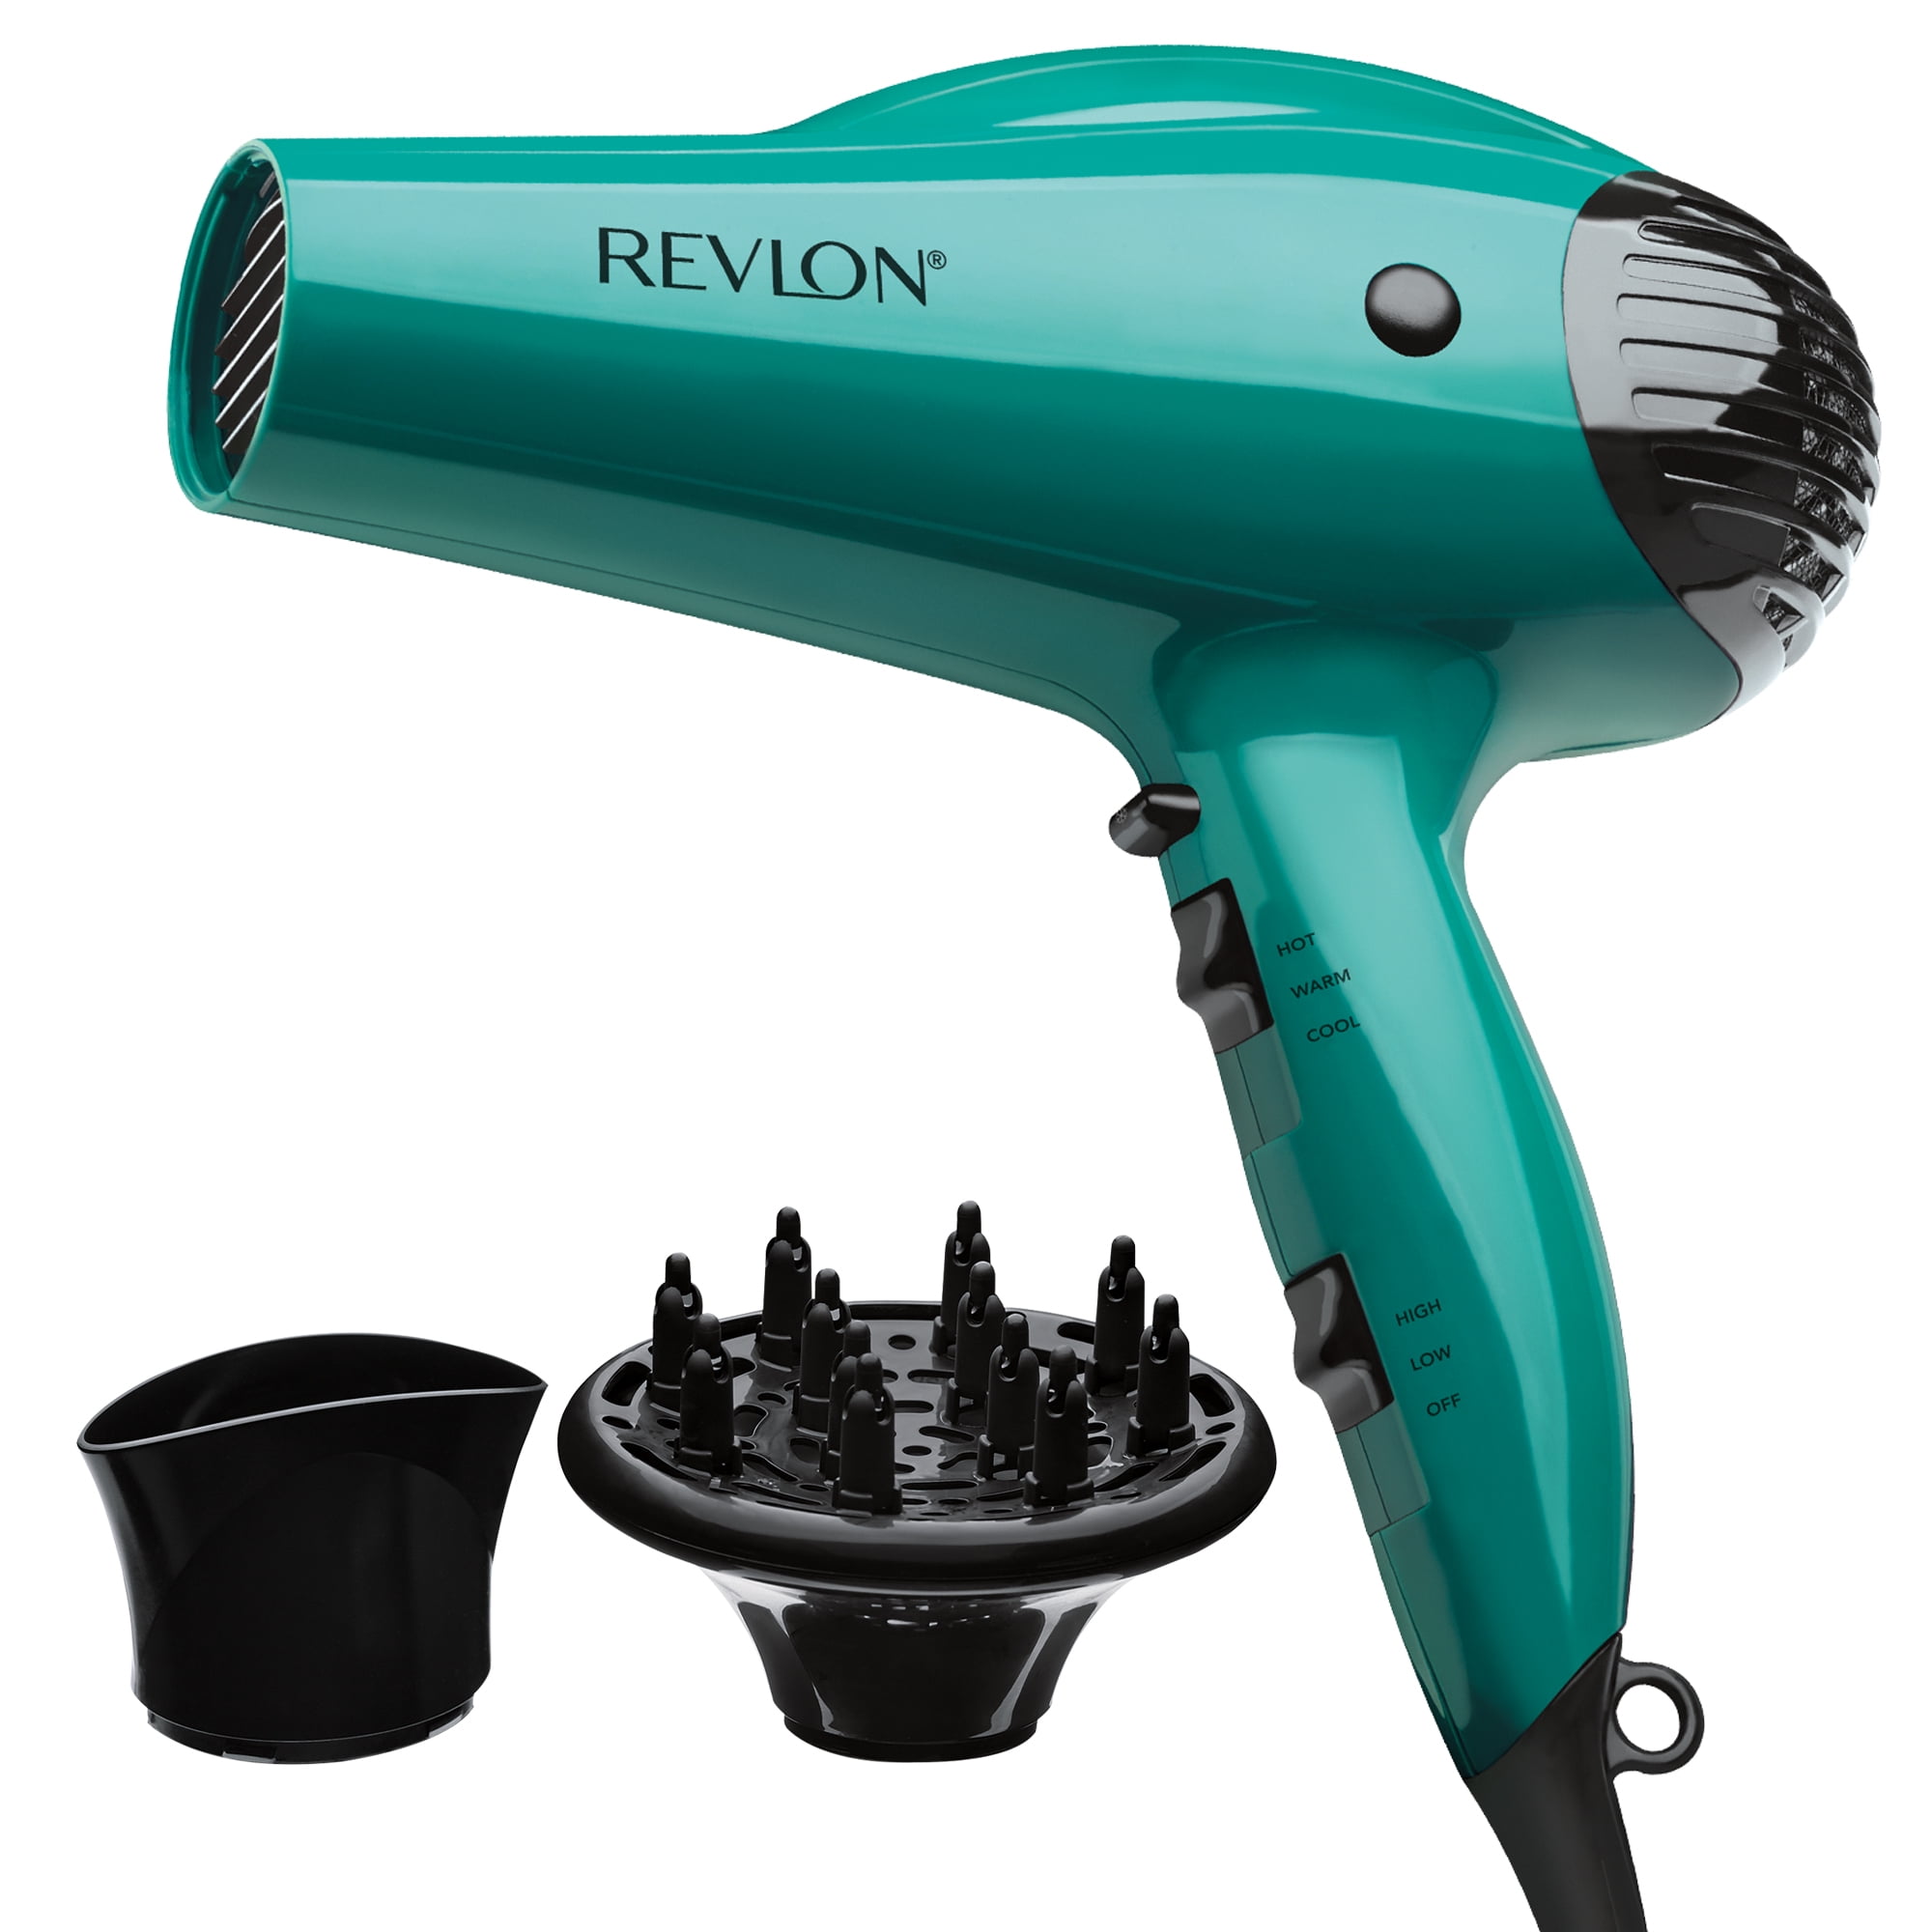 Revlon Essentials Volume Booster Hair Dryer, Green Blow Dryer with Concentrator and Diffuser